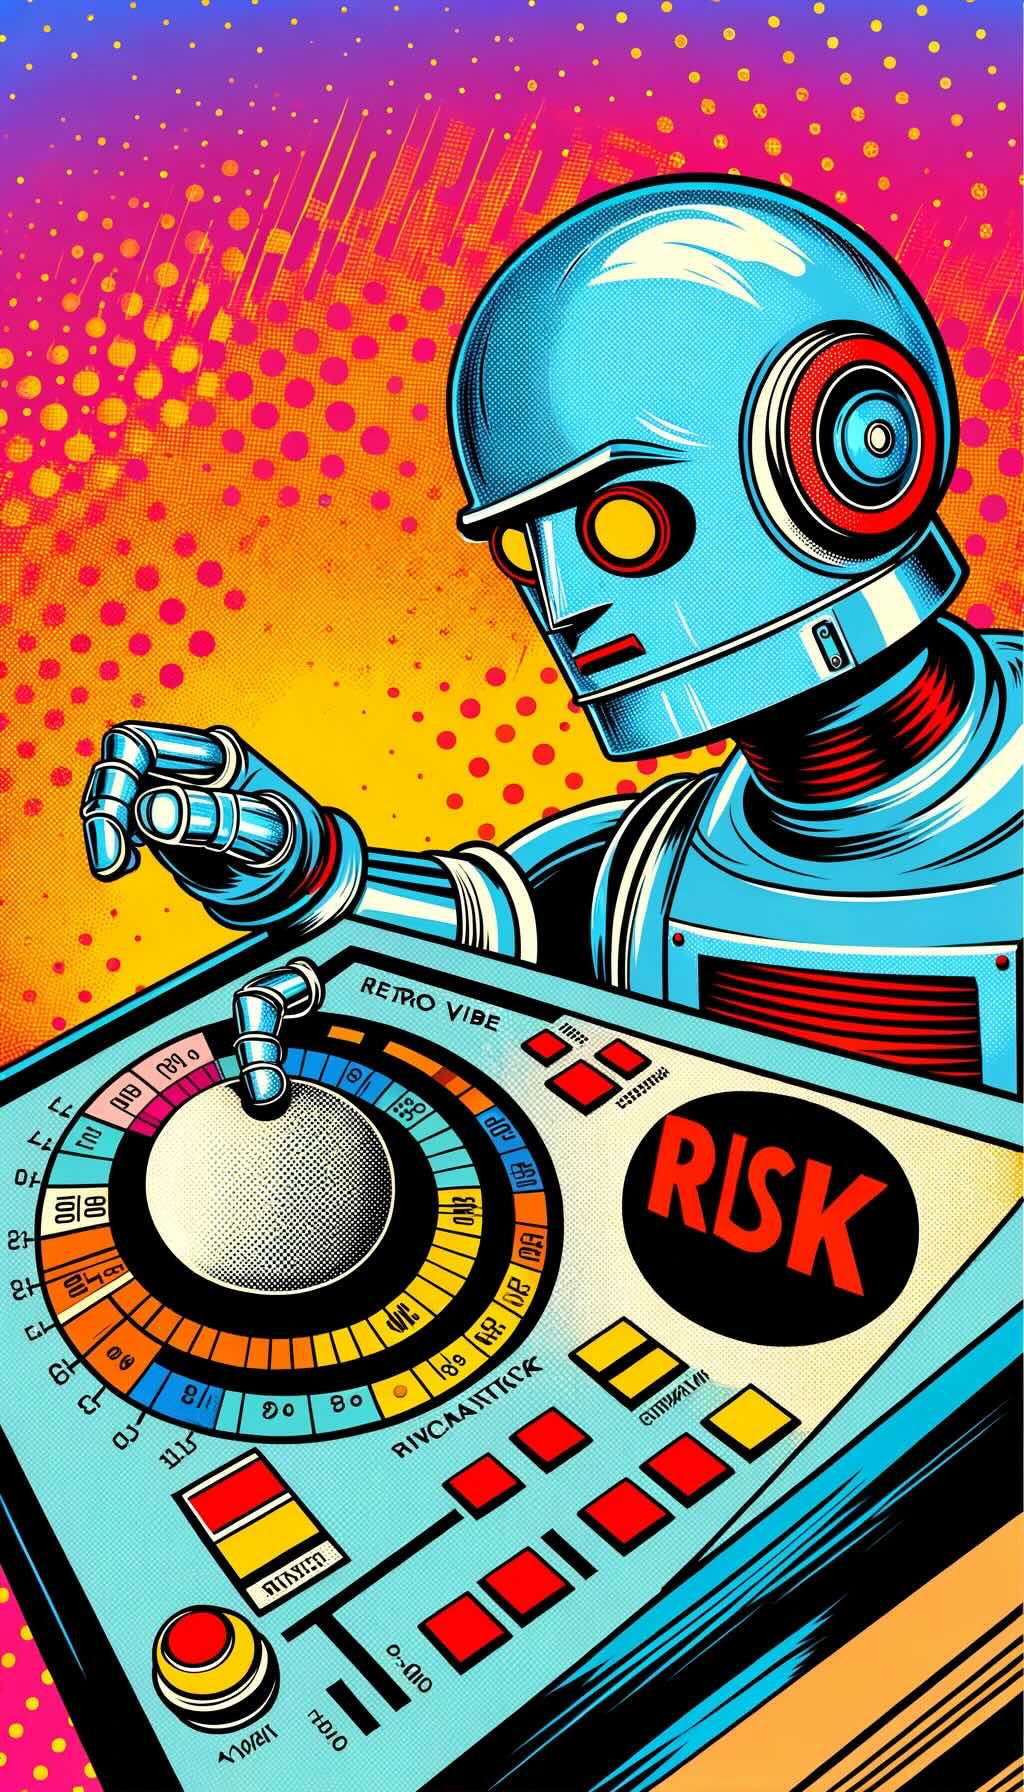 Depicting a retro vibe robot adjusting a risk dial, capturing a playful yet thoughtful representation of financial risk management